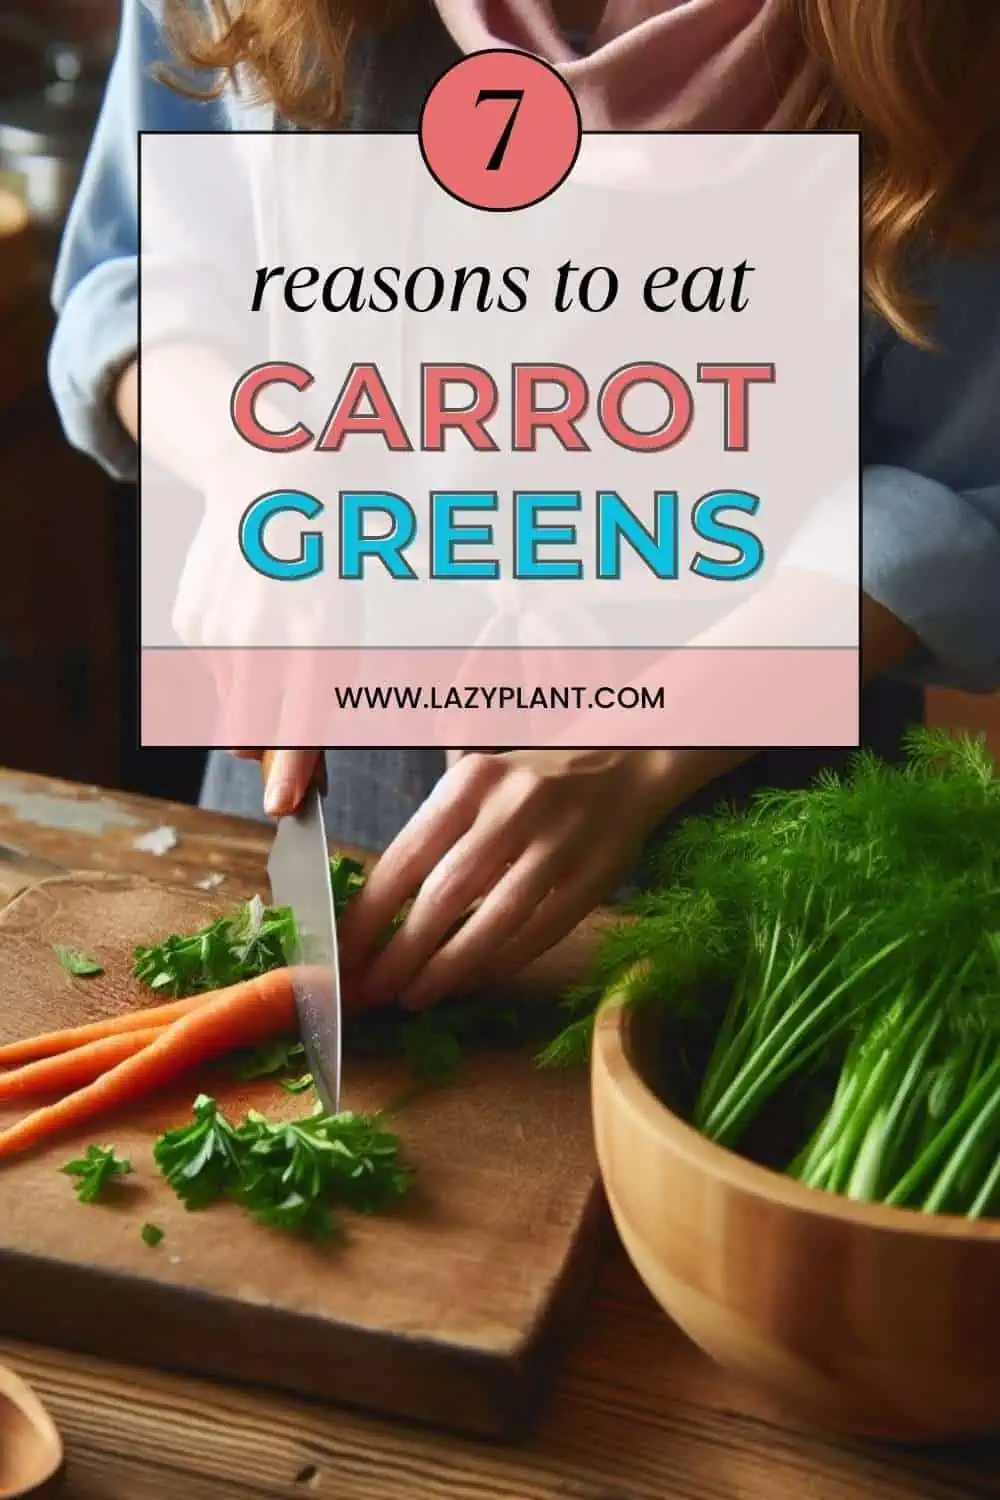 7 reasons to eat carrot leaves.